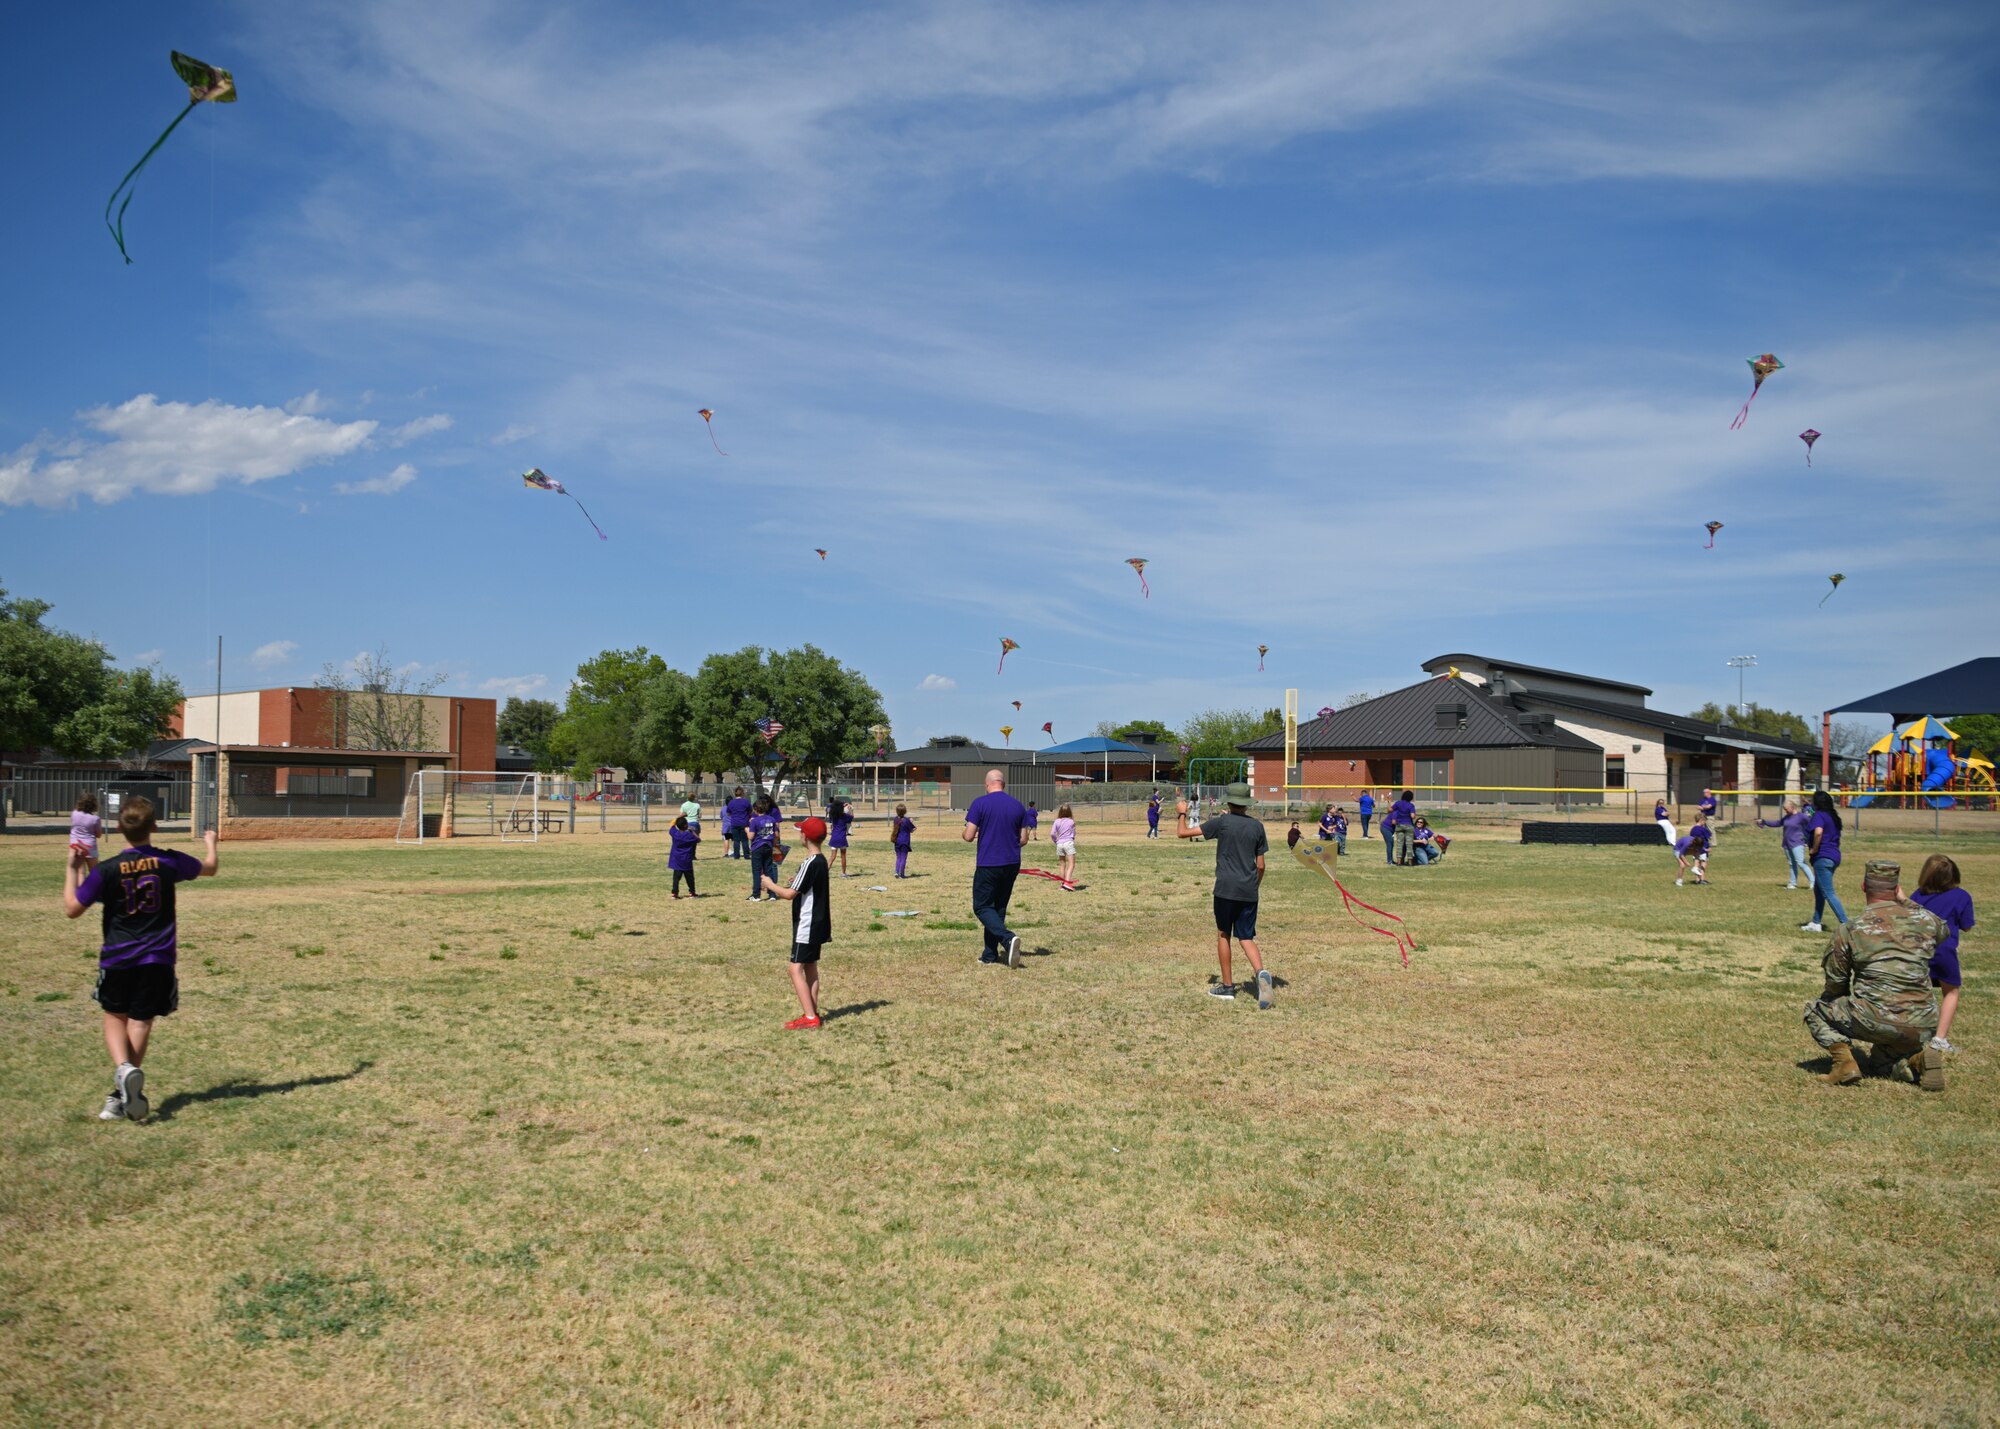 Participants fly their kites in celebration of Month of the Military Child at the School Age Program building, Goodfellow Air Force Base, Texas, April 20, 2022. The kites were flown to celebrate military children and their invaluable support. (U.S. Air Force photo by Senior Airman Ethan Sherwood)